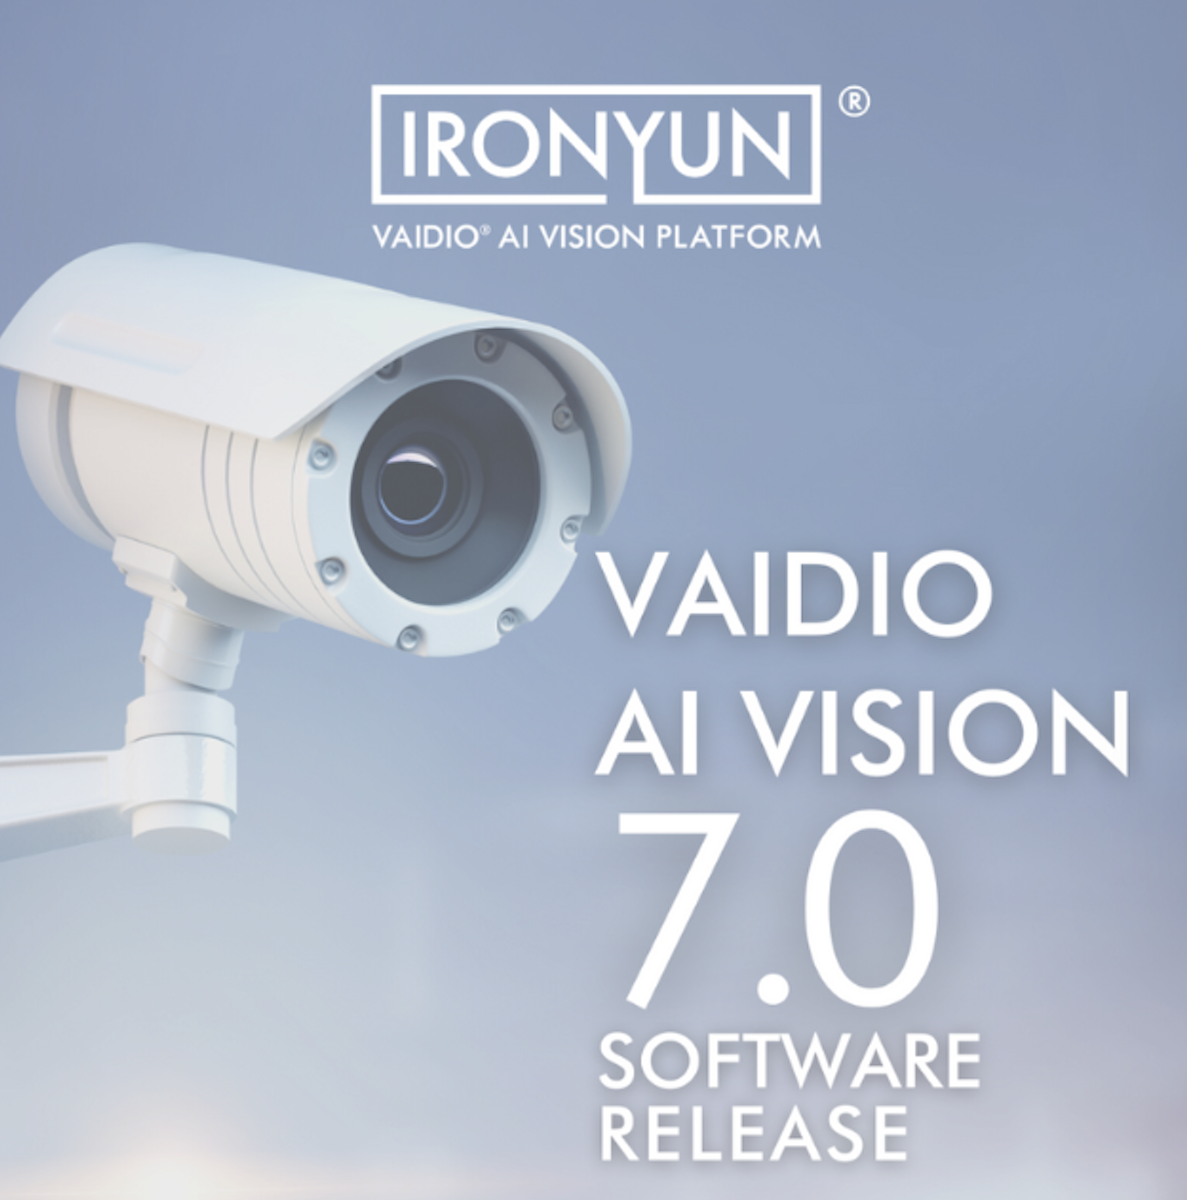 IronYun Expands The Power Of The Vaidio AI Vision Platform With 7.1 Release